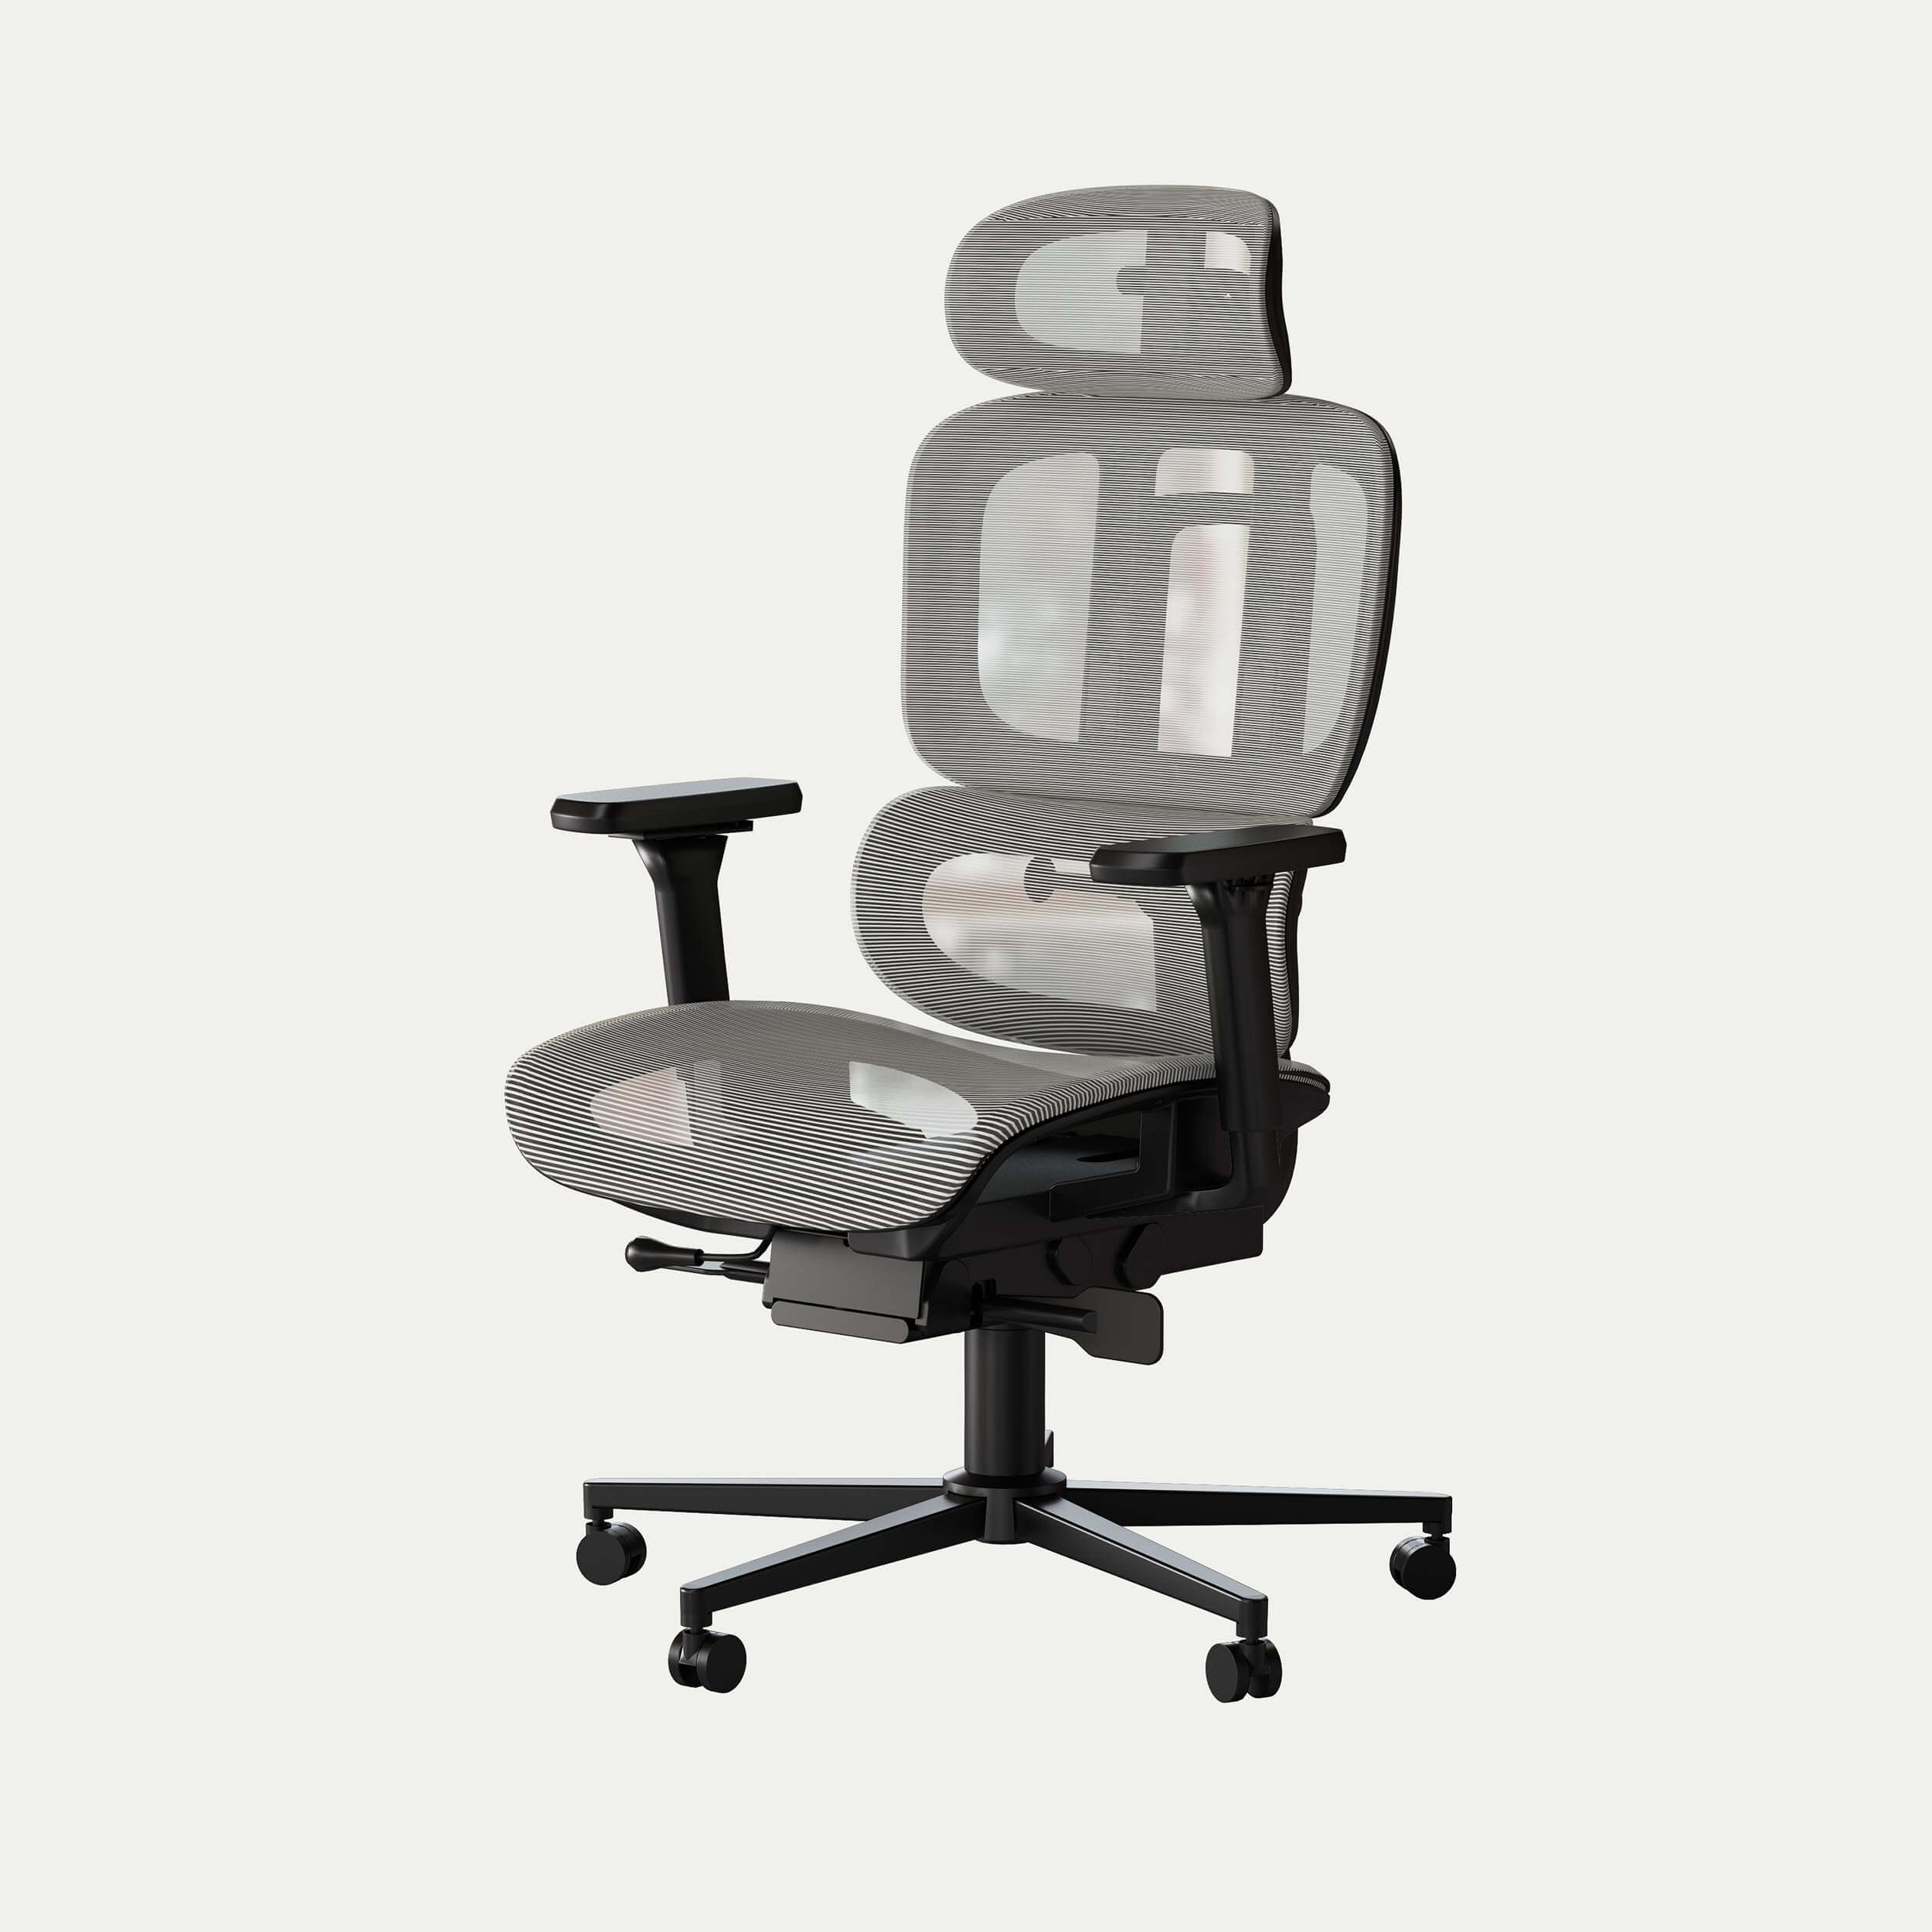 Maidesite ergonomic office chair grey with independent back support and headrest 